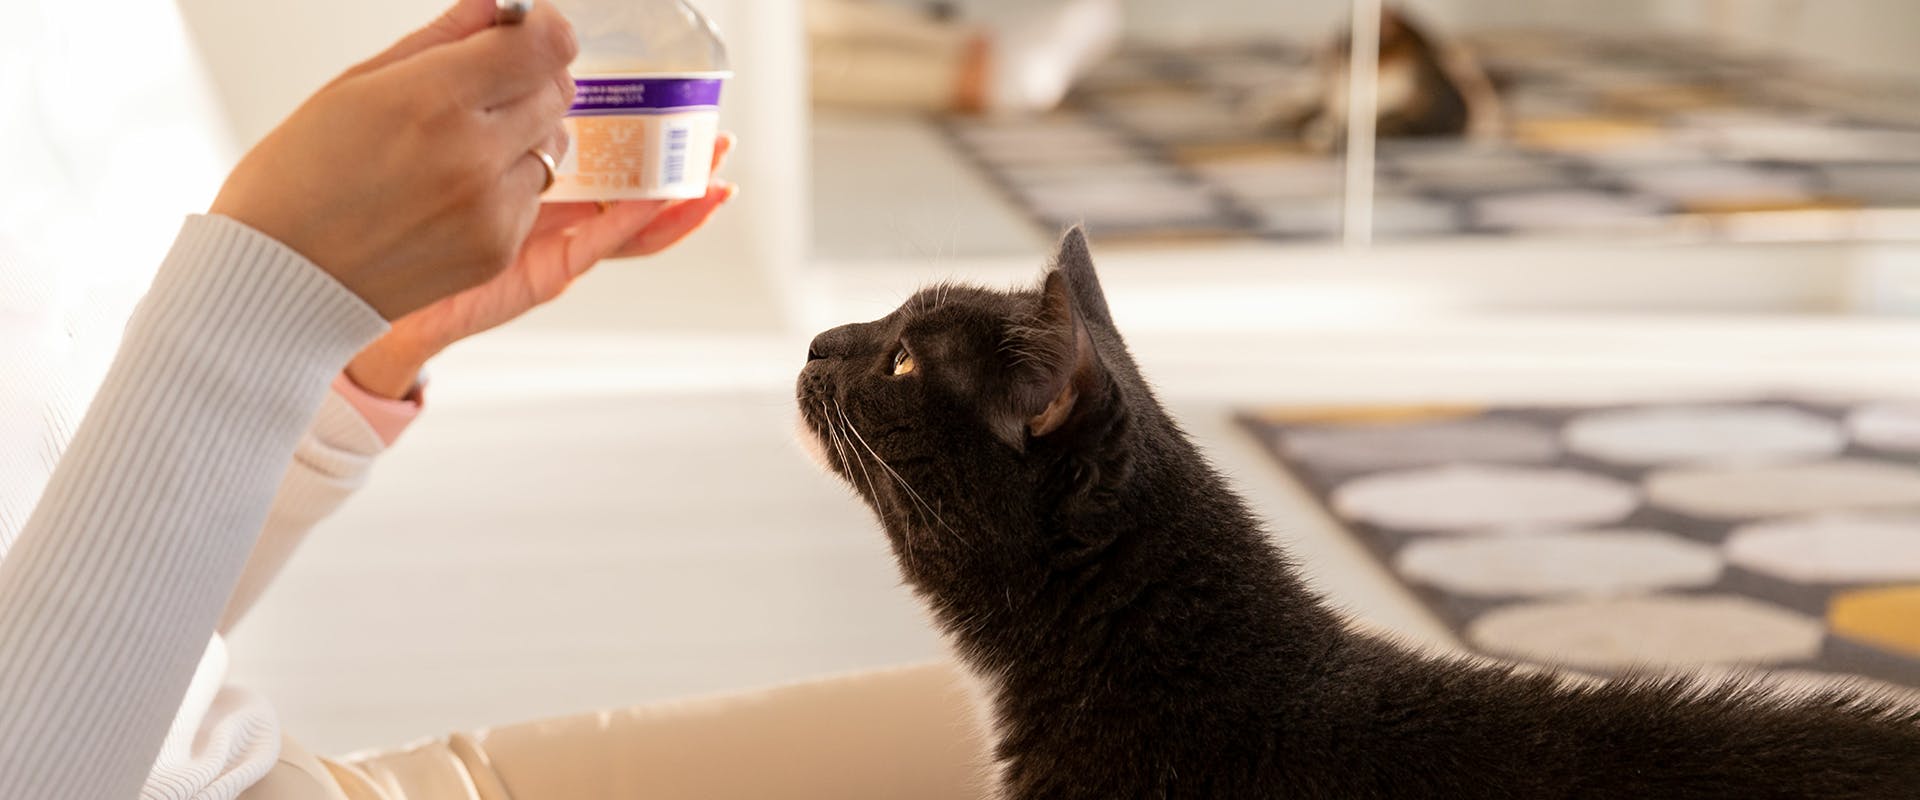 A person eating a yogurt, a black cat on their lap looking at the yogurt pot